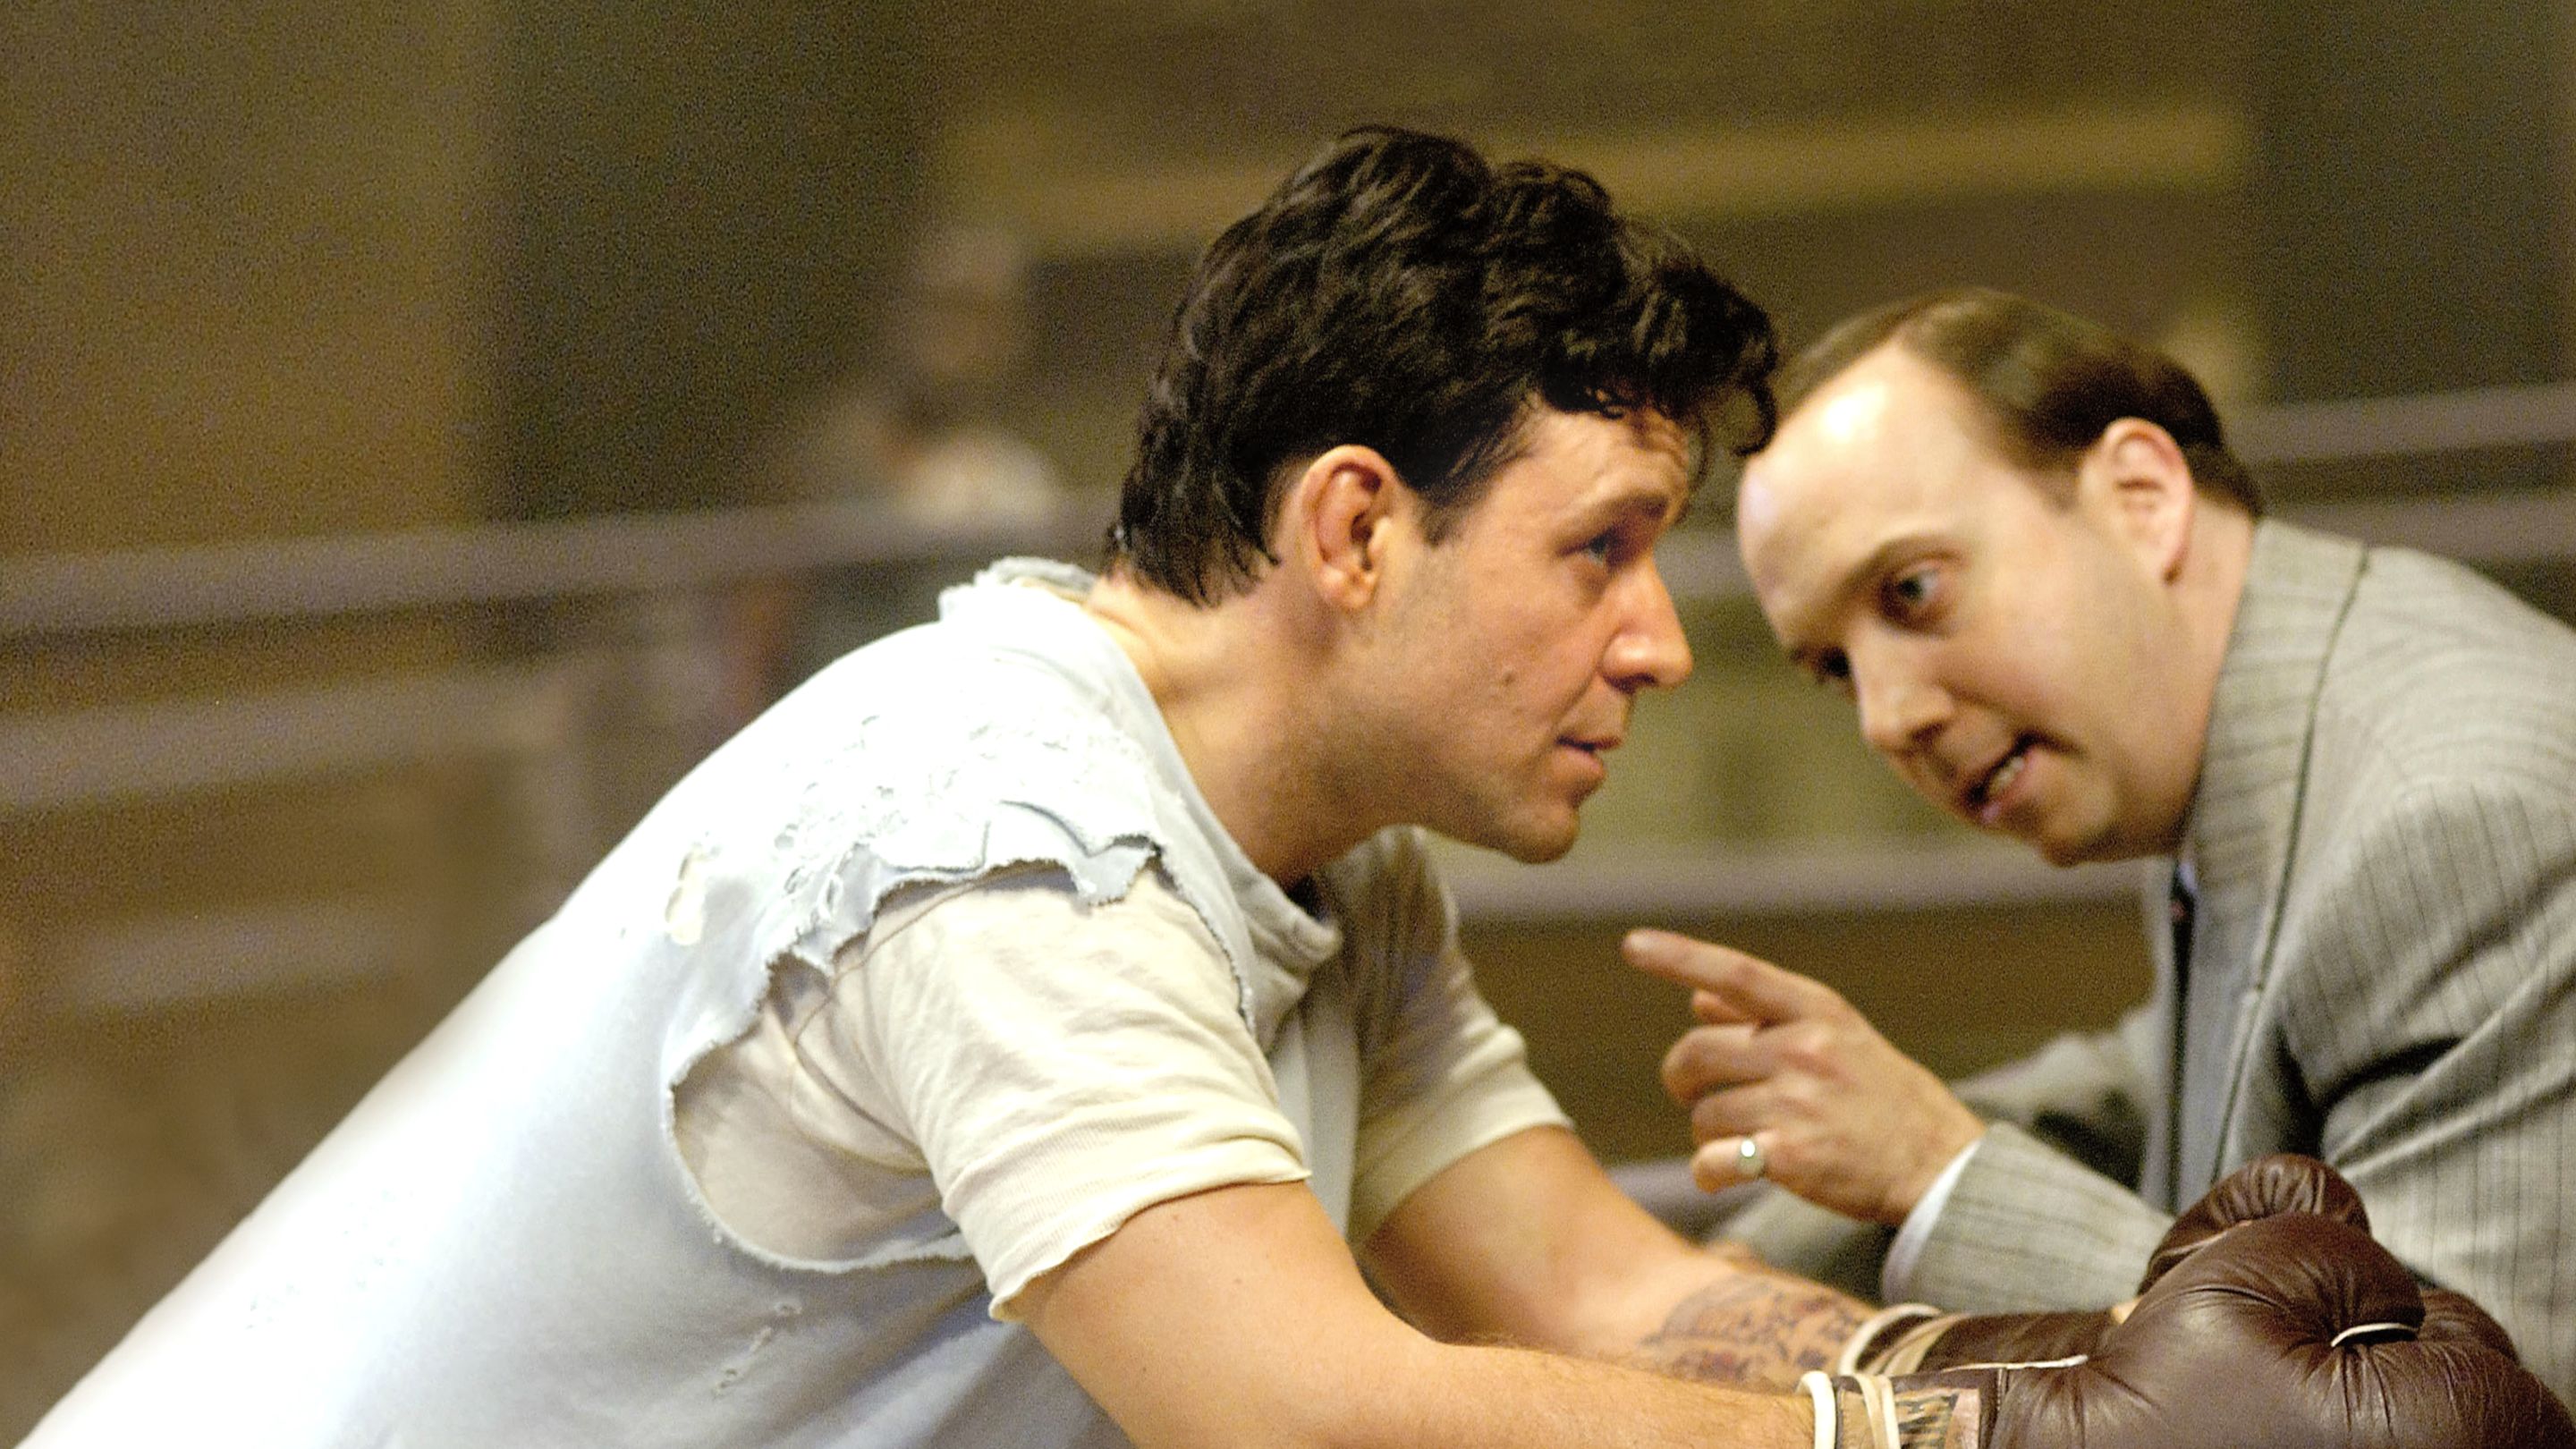 where can i watch cinderella man online for free